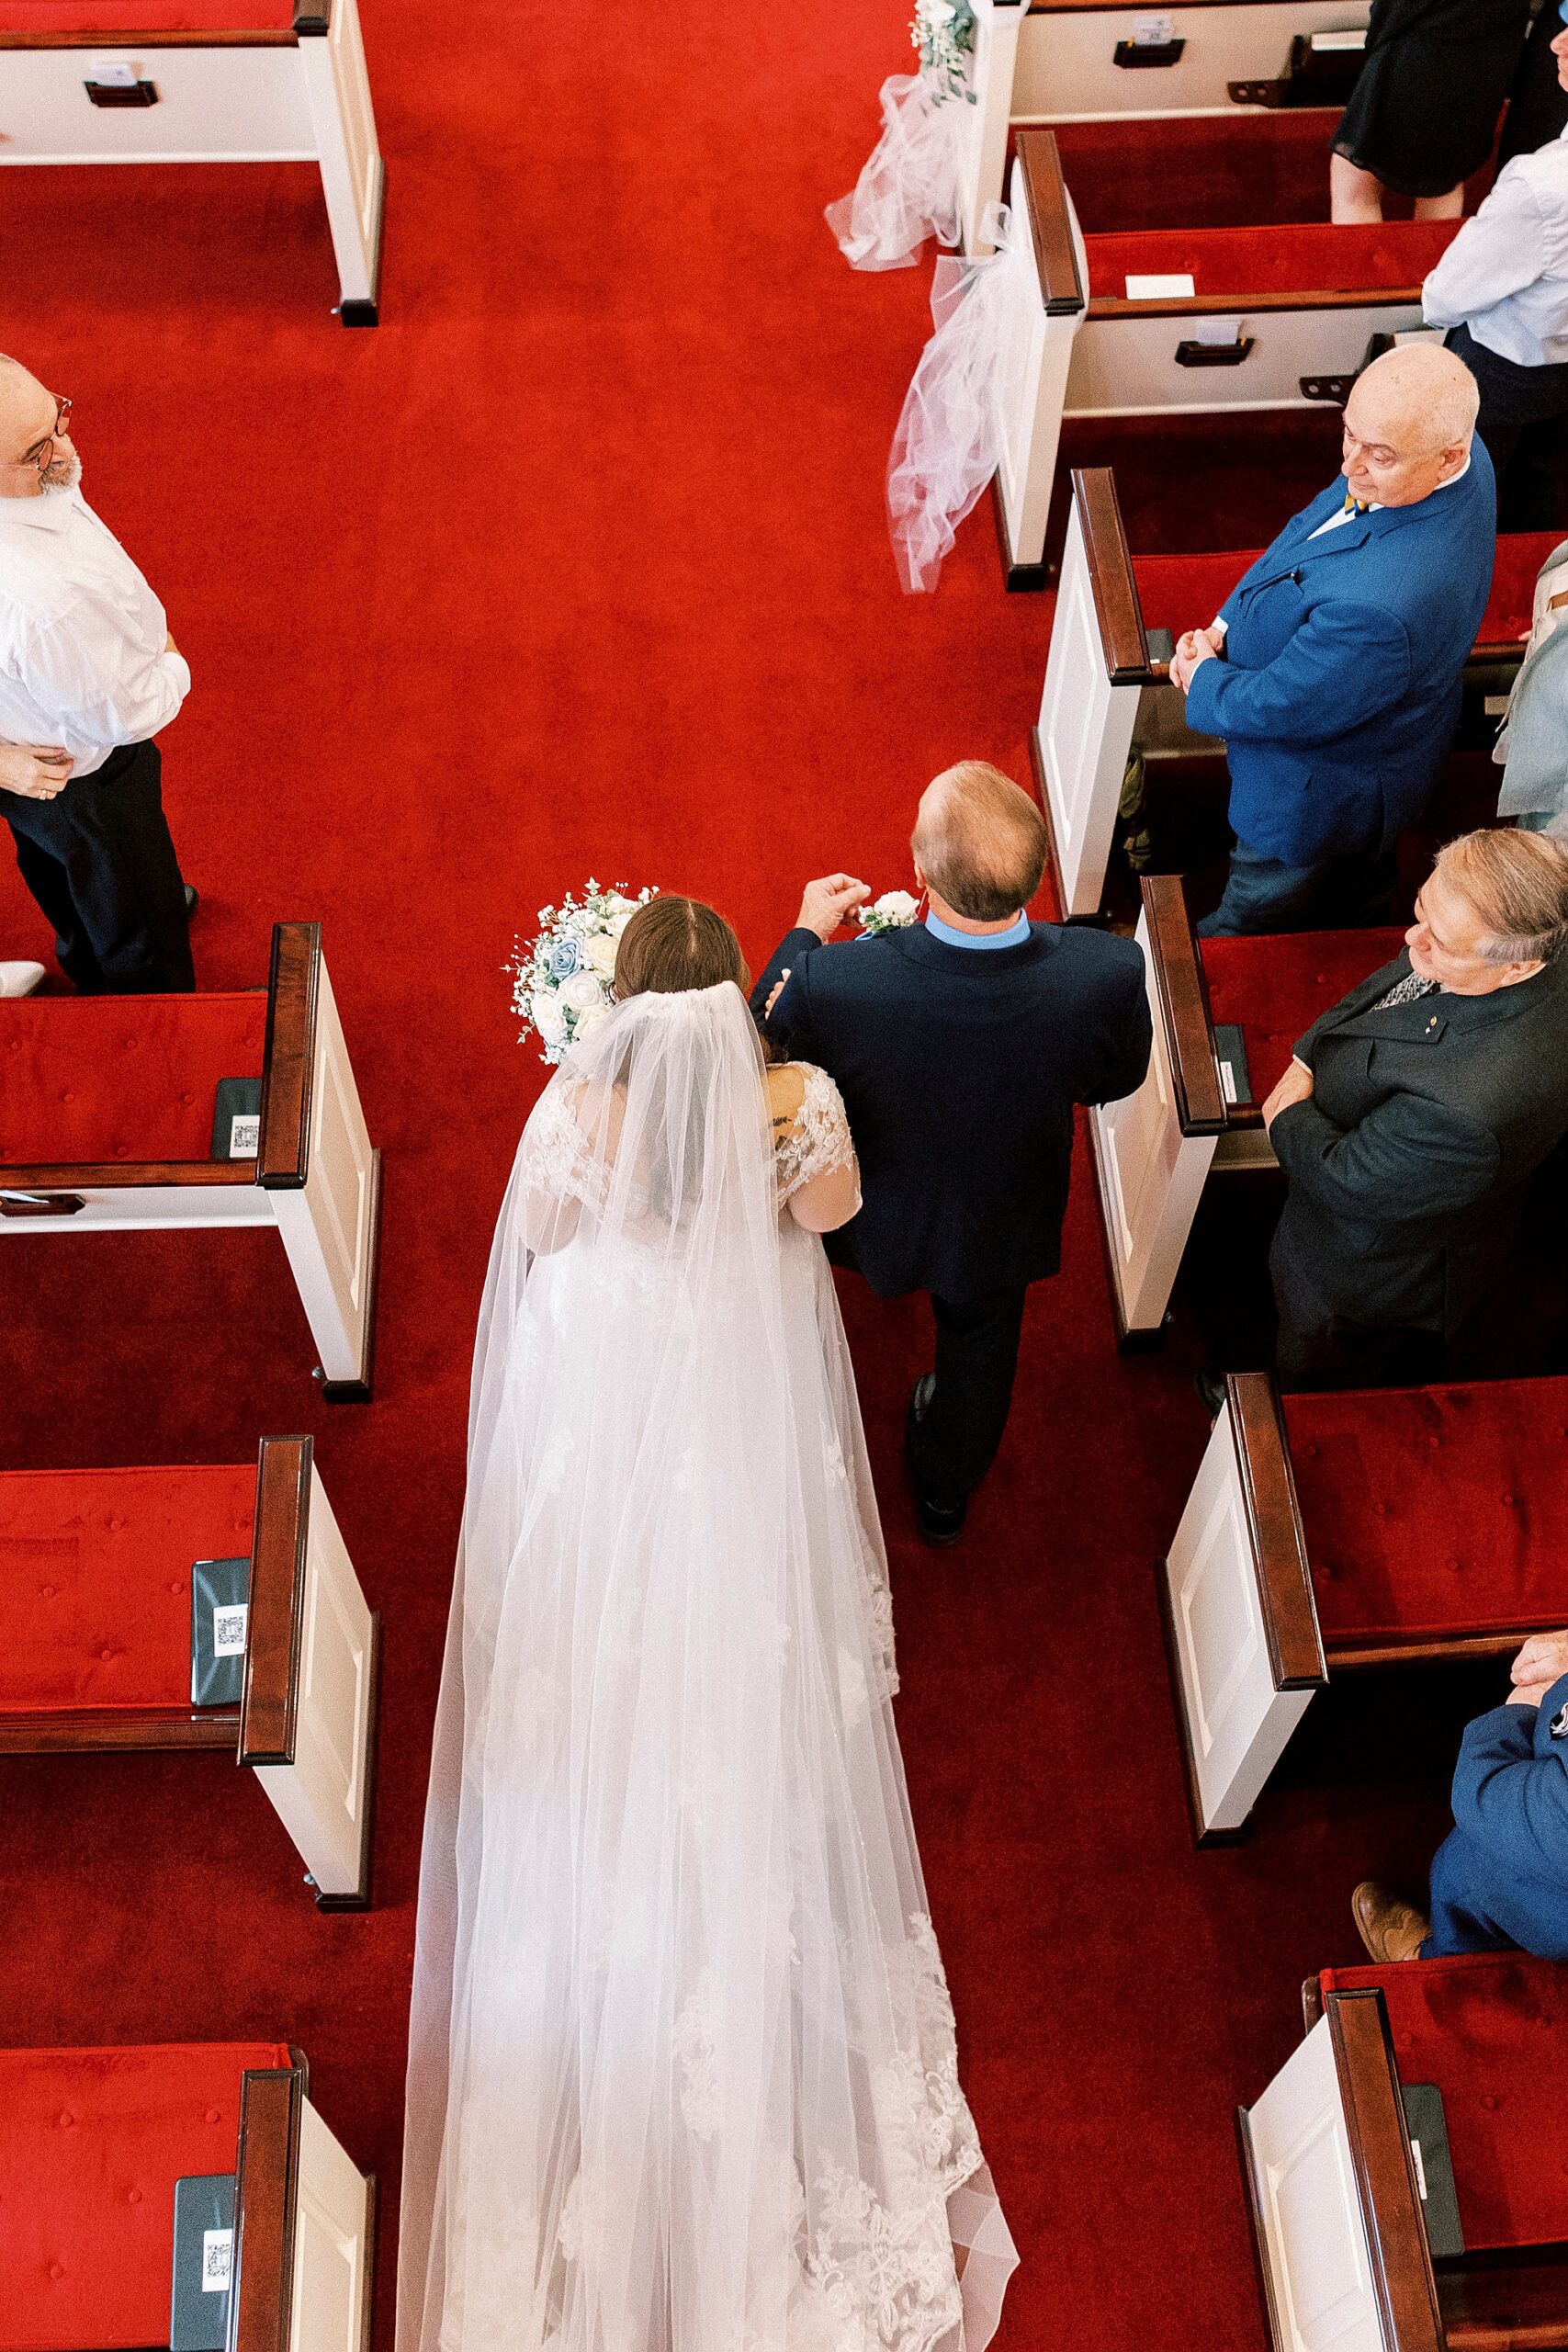 photo from above as bride walks down aisle inside First Baptist Church in Kannapolis NC